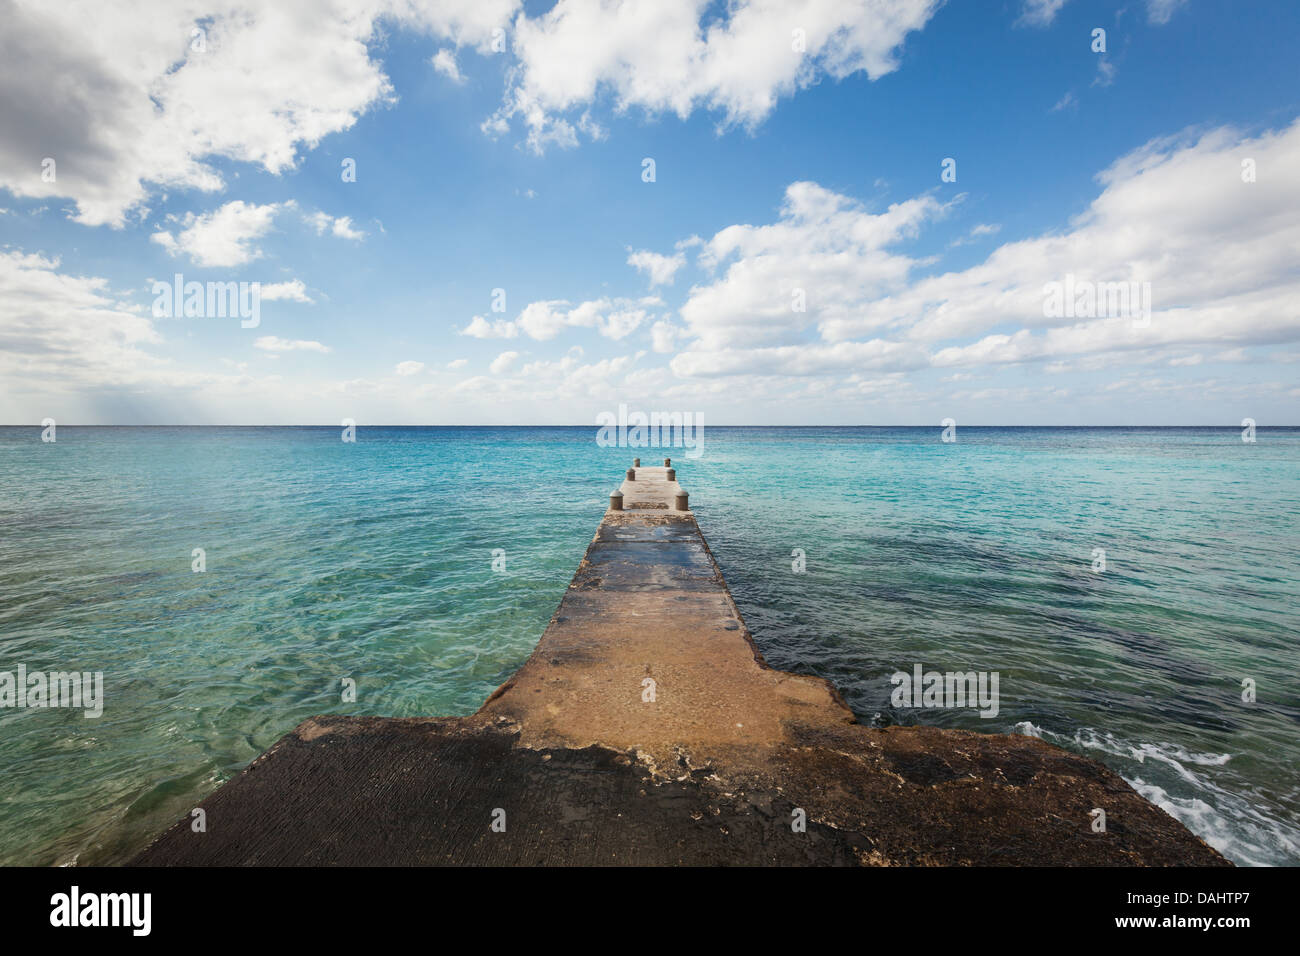 A stone dock overlooking the ocean in Playa Azul Cozumel, Mexico Stock Photo